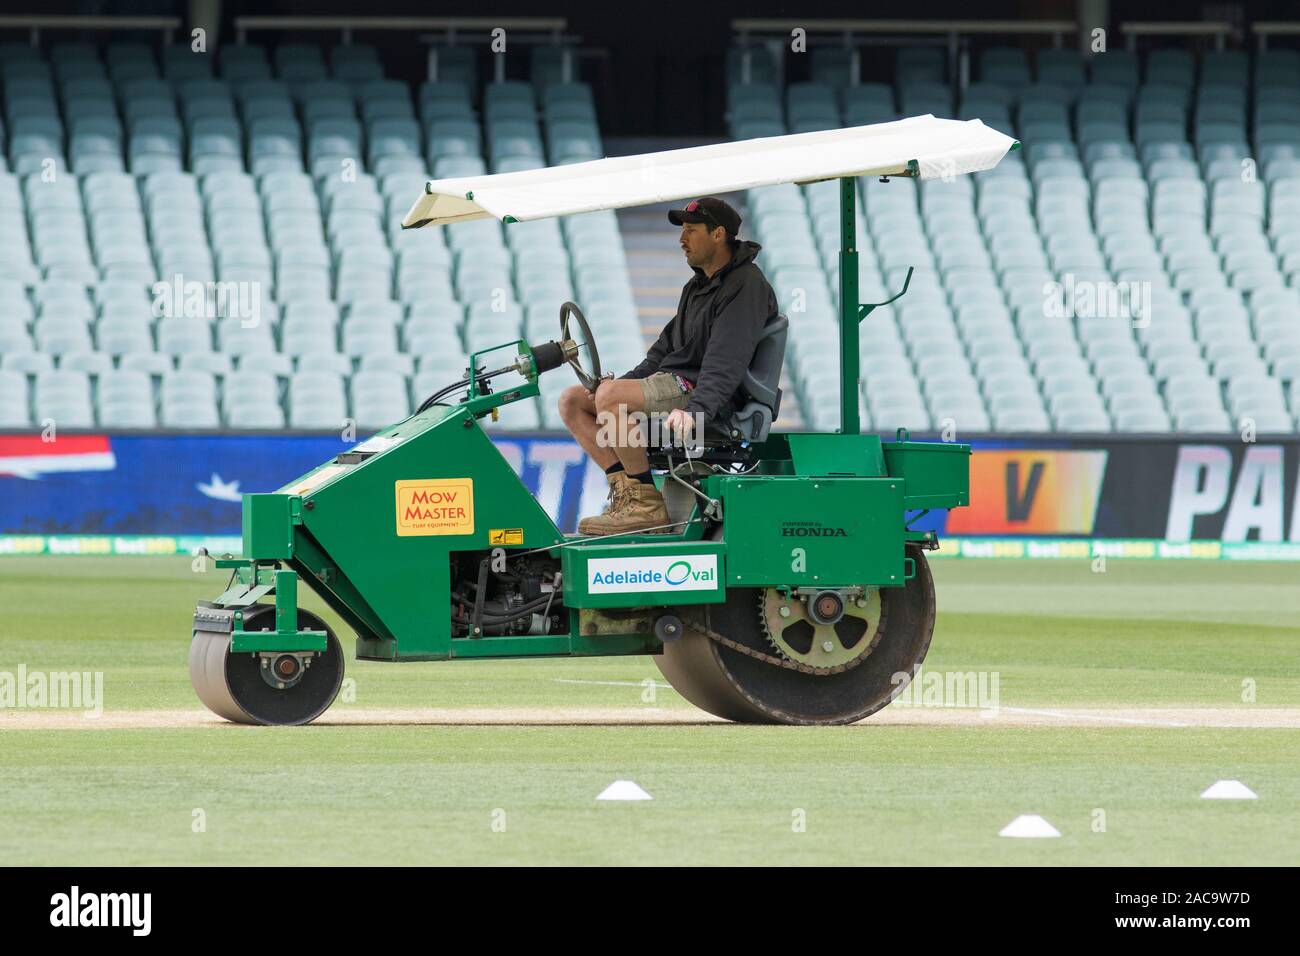 Adelaide, Australia 2 December 2019 . A cricket pitch roller before the start  of play on  Day 4 of the 2nd Domain Day Night test between Australia and Pakistan at the Adelaide Oval. Australia leads 1-0 in the 2 match series .Credit: amer ghazzal/Alamy Live News Stock Photo